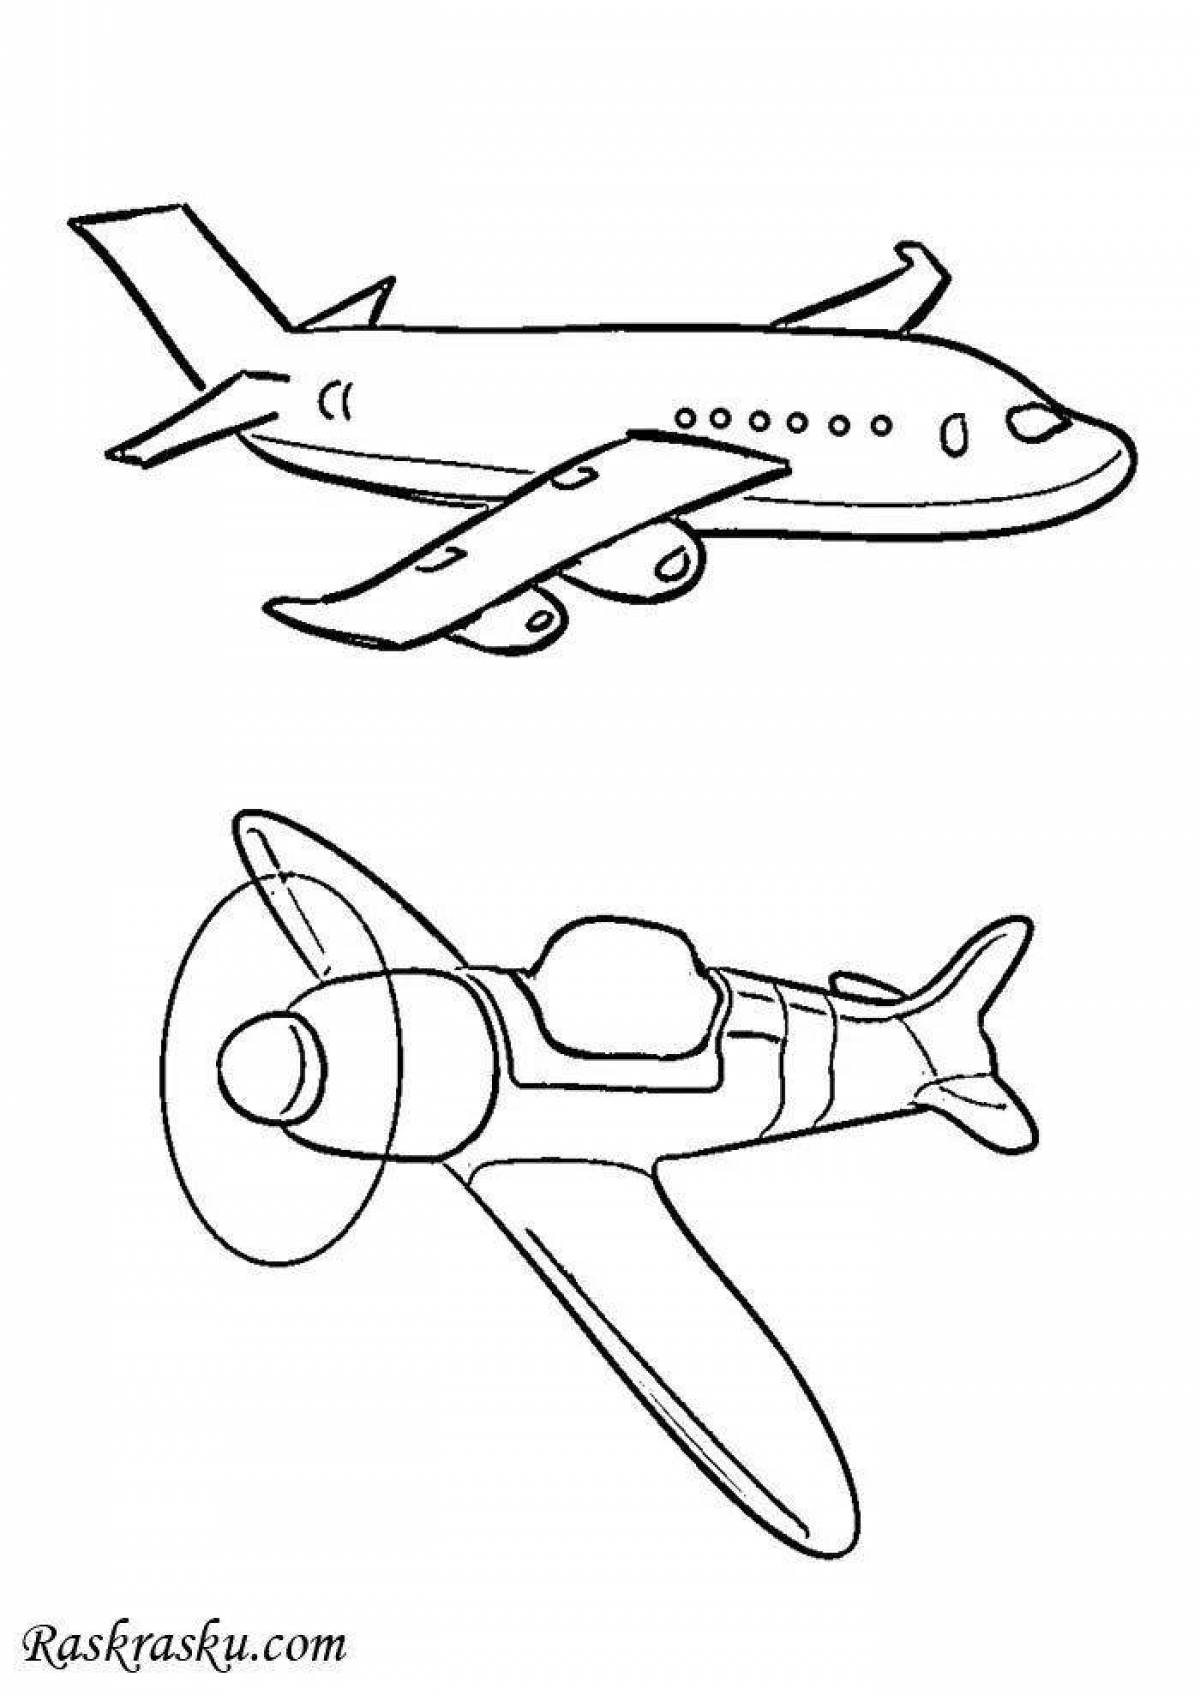 Glitter airplane coloring page for 7 year olds